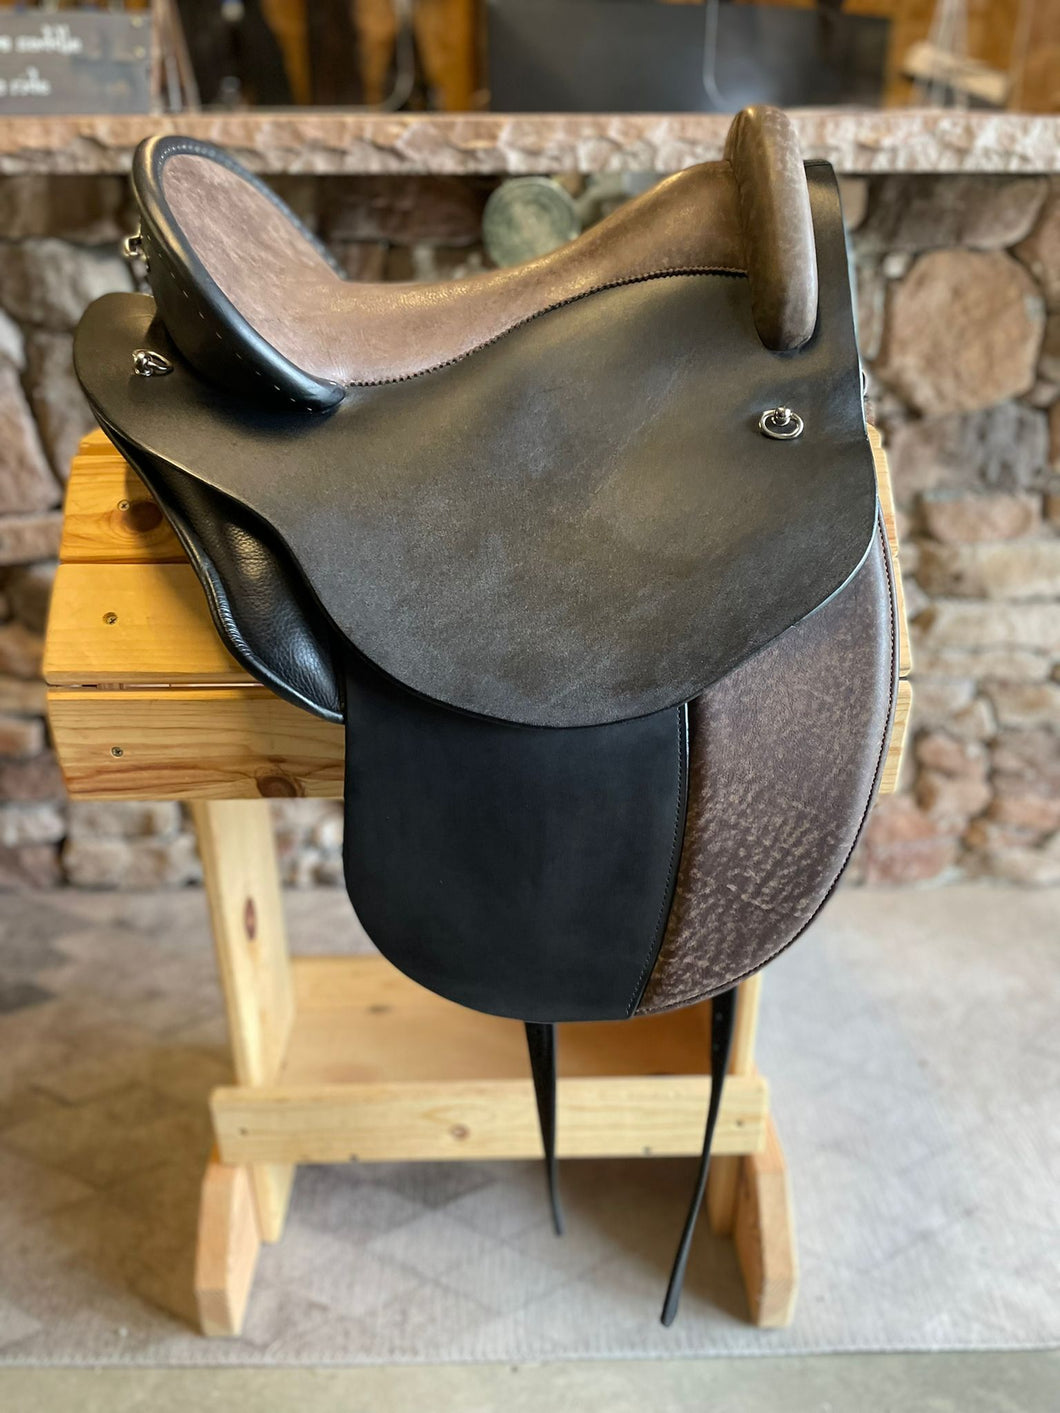 dp saddlery quantum with dressage flap 5819, side view on wooden saddle rack